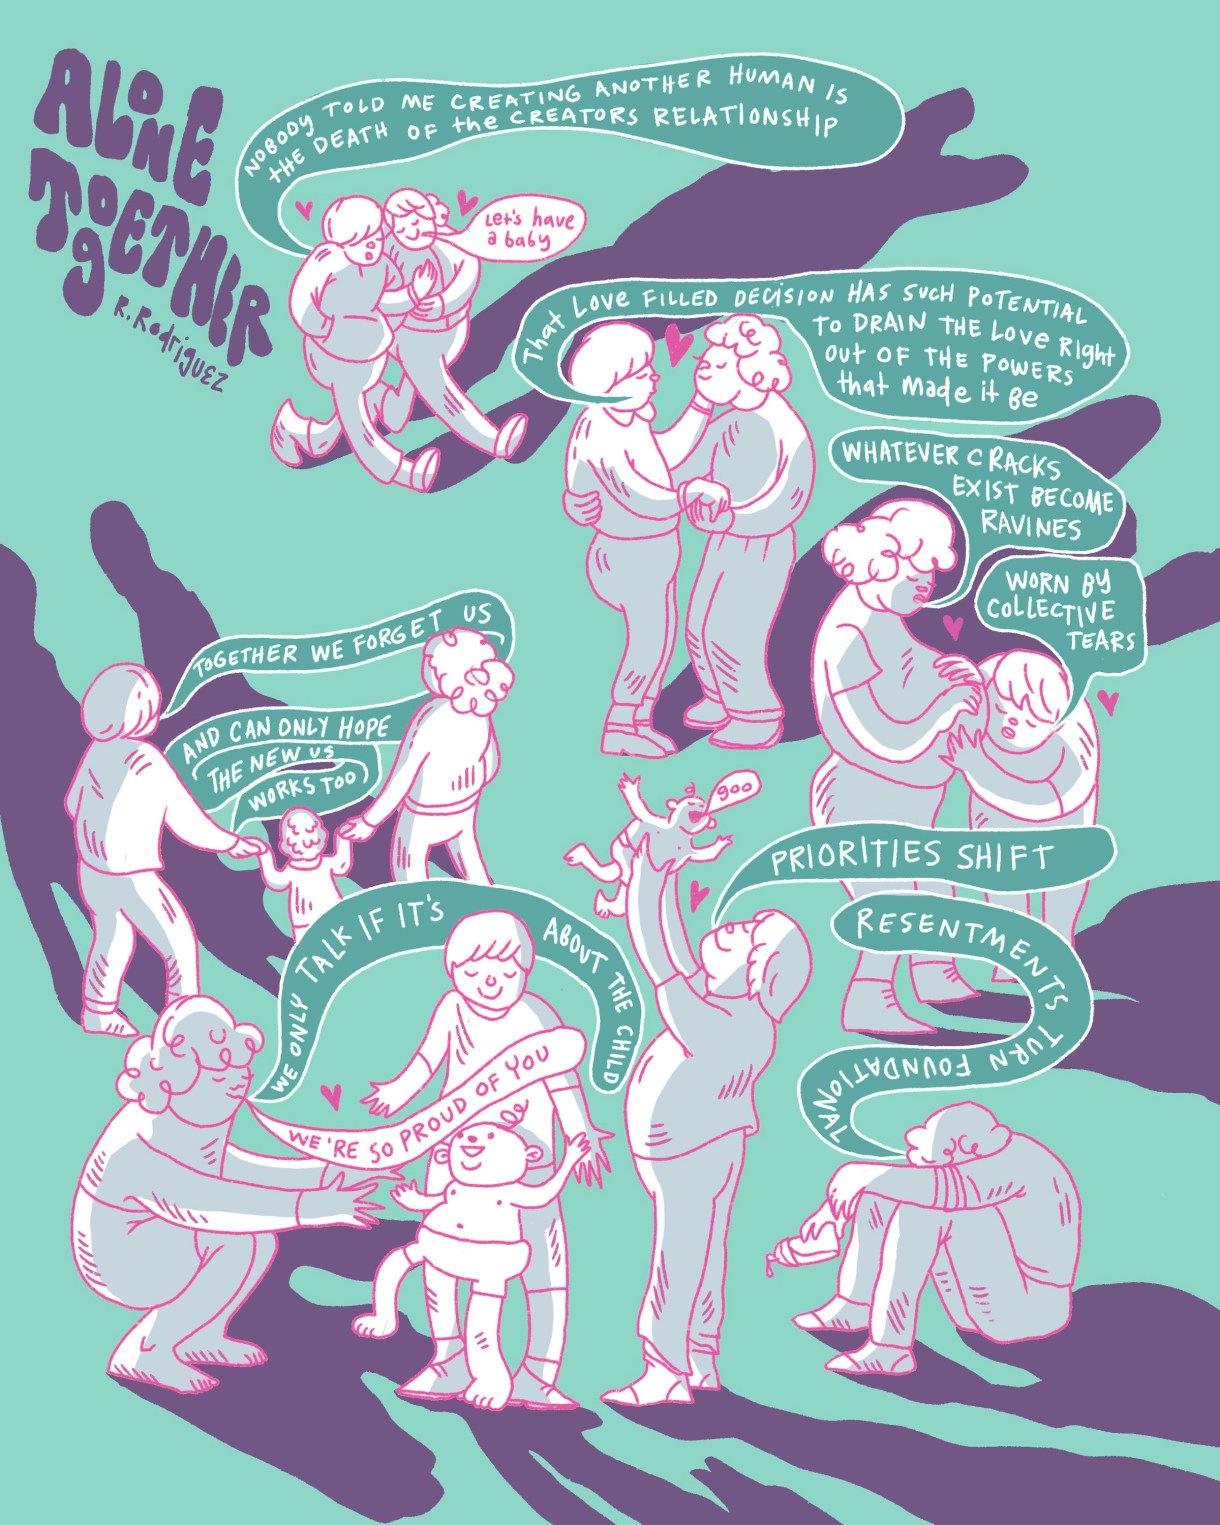 This comic is against a bright blue background. In the uppser left corner, bubbly text reads, “Alone Together.” Smaller text reads, “R. Rodriguez” underneath. The people in the comic are pink line drawings filled in with white. They all cast long, purple shadows. The images are to be read in backwards S shape.  In the first image, two androgynous people in sweat swuits are walking arm in arm with tiny pink hearts beside them both. One person has short, straight hair. The other hair short, curly hair. The straight-haired person has a blue speech bubble with white text inside, which reads, “Nobody told me creating another human is the death of the creators of the relationship.” The curly-haired person has a white speech bubble with pink text, which reads, “Let’s have a baby.”  In the next image, the two people slow dance together with a small, pink heart bewteen them. The straight-haired person says, “That love filled decision has such potential to frain the love right out of the powers that made it be.”   In the next image, the curly-haired person is pregant. They say, “Whatever cracks exist become ravines.” The straight-haired person puts their ear to the curly-haired person’s belly and touches it. They say, “Worn by collective tears.” Tiny, pink hearts are above each of them. In the next image, the curly-haired person sits on the ground holding a bottle with their head buried in their knees. They say, “Resentments turn foundational.” The straight-haired person stands facing a away from their partner and holds their baby, who’s wearing a diaper and has one curly hair on their head, in the air. The baby says, “Goo.” The straight-haired person says, “Priorities shift.” There is a tiny, pink heart between the straight-haired person and the baby.  In the next image, the straight-haired person stands behind the baby, who’s standing up. The curly hair person squatss and holds their arms out to the baby. They say, “We only talk if it’s about the child.” And in another speech bubble, they say, “We’re so proud of you.”  In the next image, both partners are facing away. Between them, there is a small child with wavy hair. They are all holding hands. The straight-haired person says, “Together we forget us and can only hope the new us works too.”